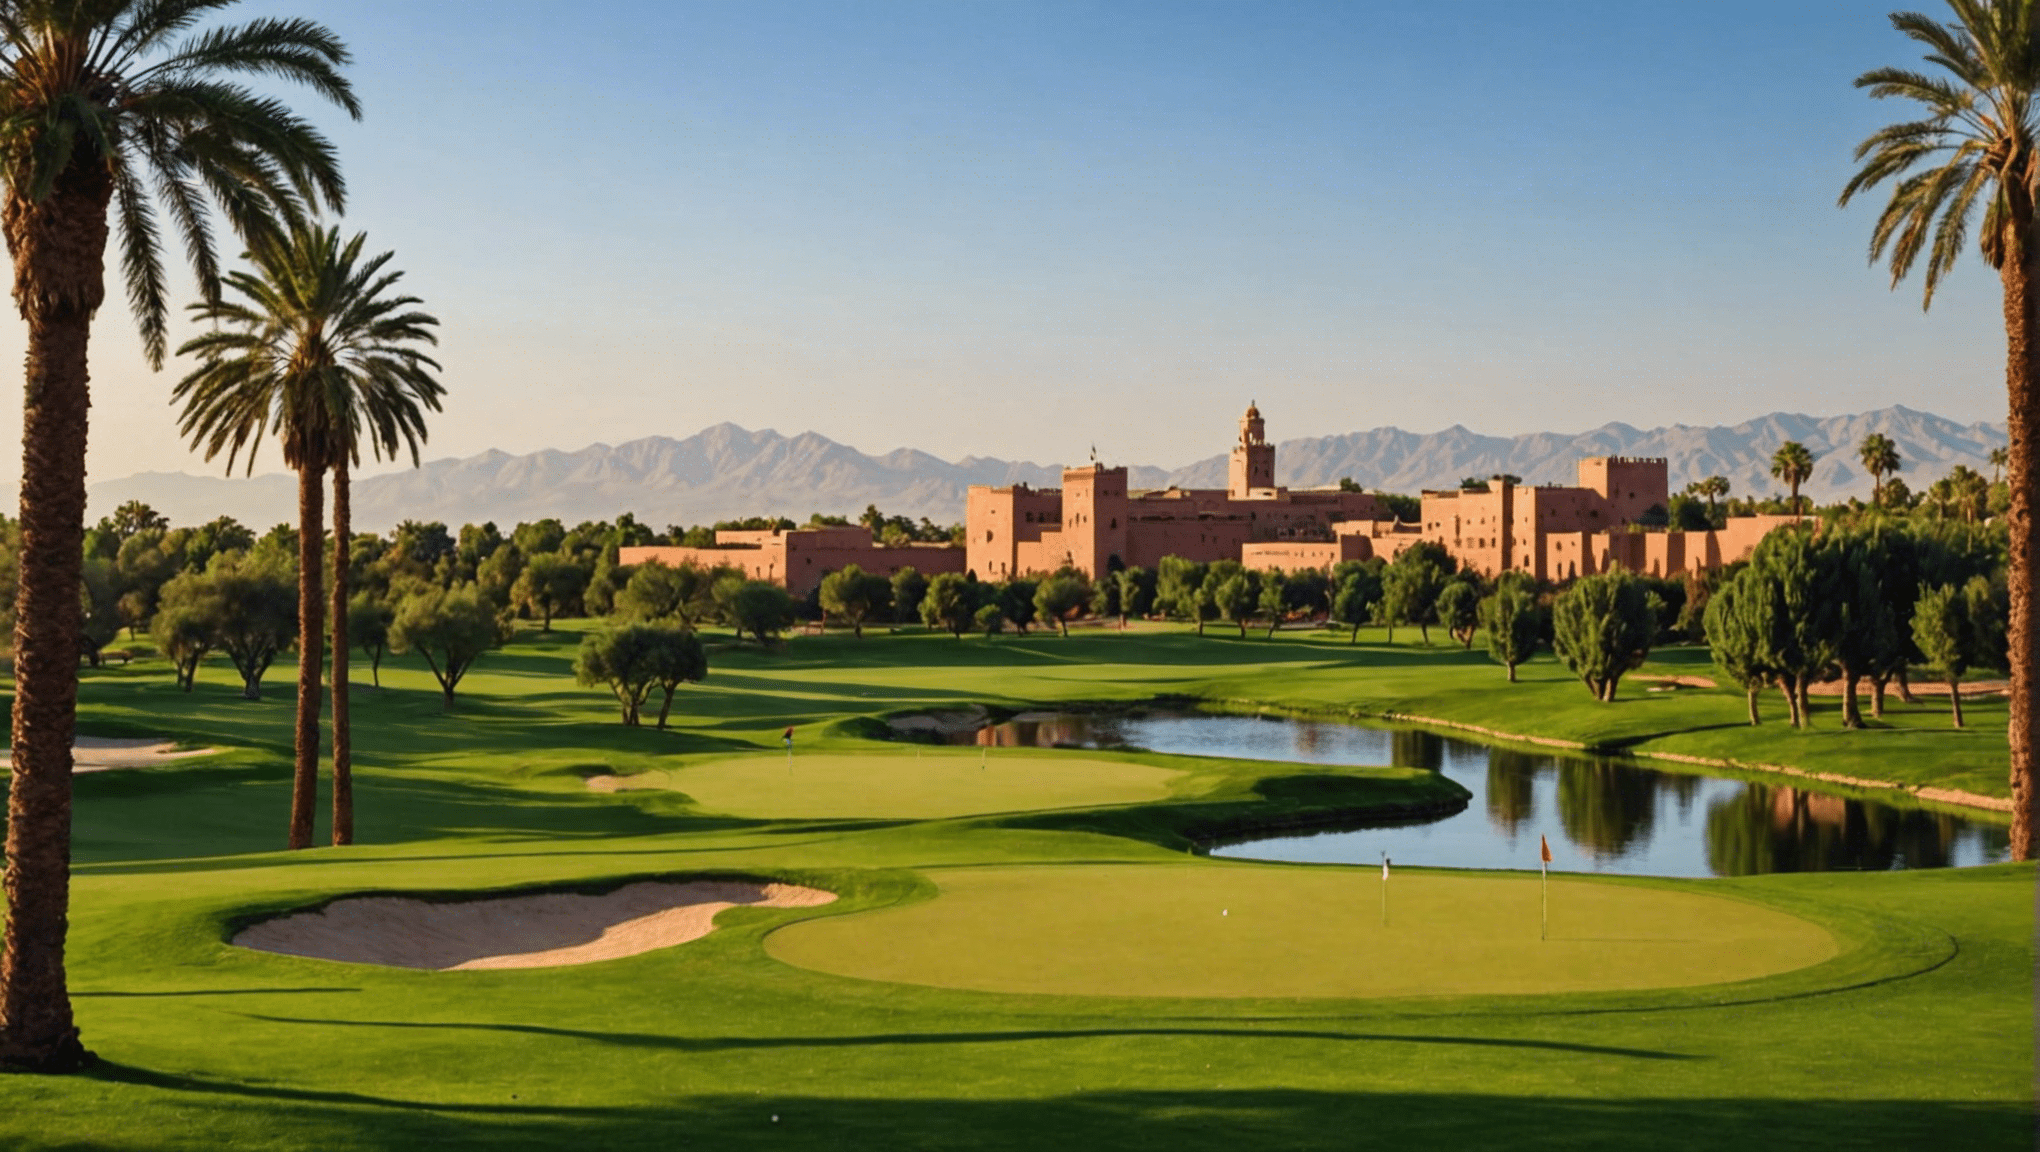 discover the numerous luxurious golf courses in marrakech, a paradise for golfers. explore the stunning golfing options in this luxurious city.